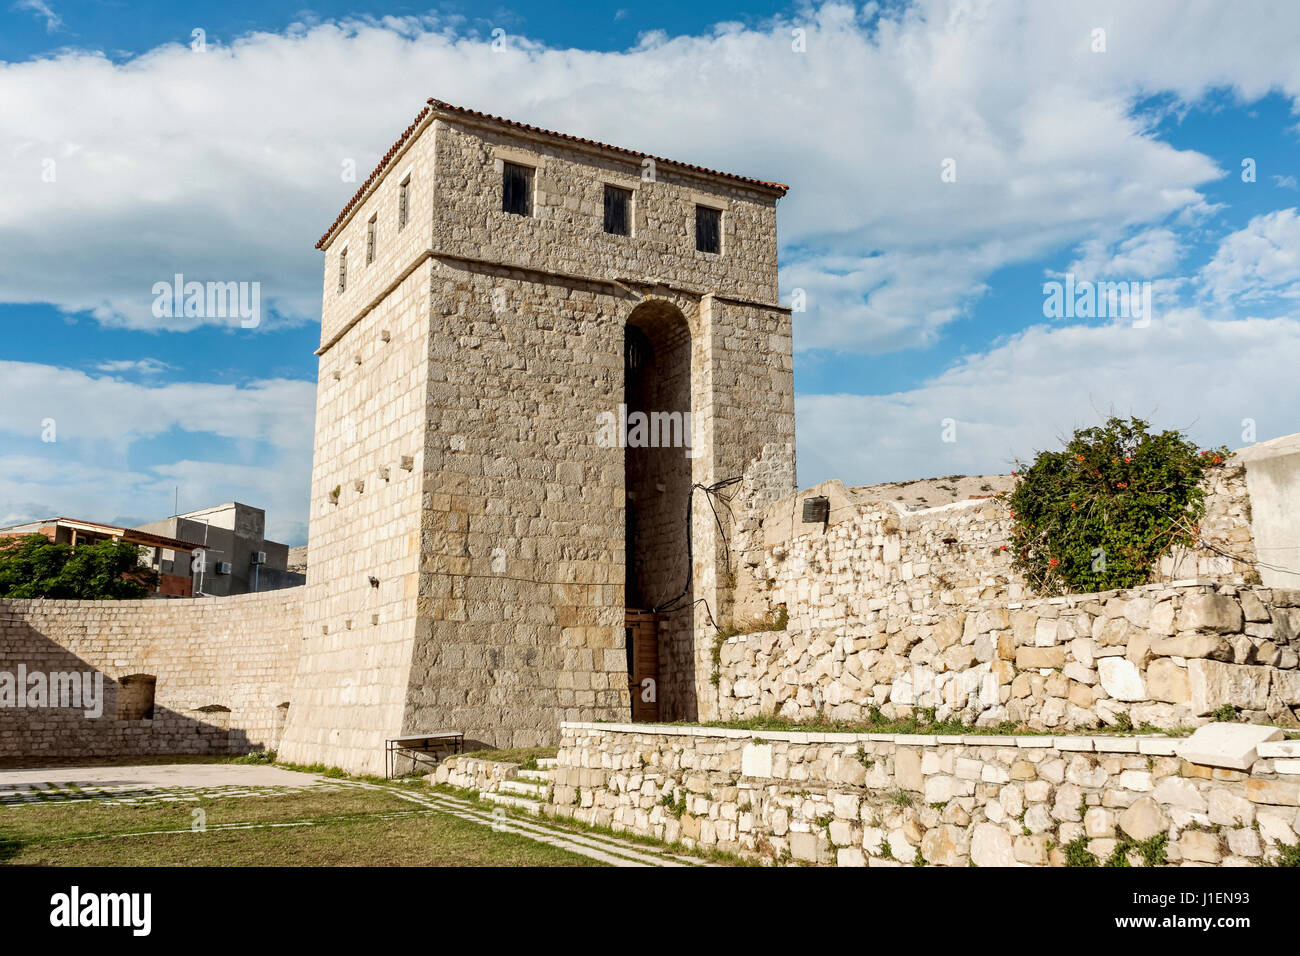 Stone tower in Pag town, Pag island, Croatia Stock Photo